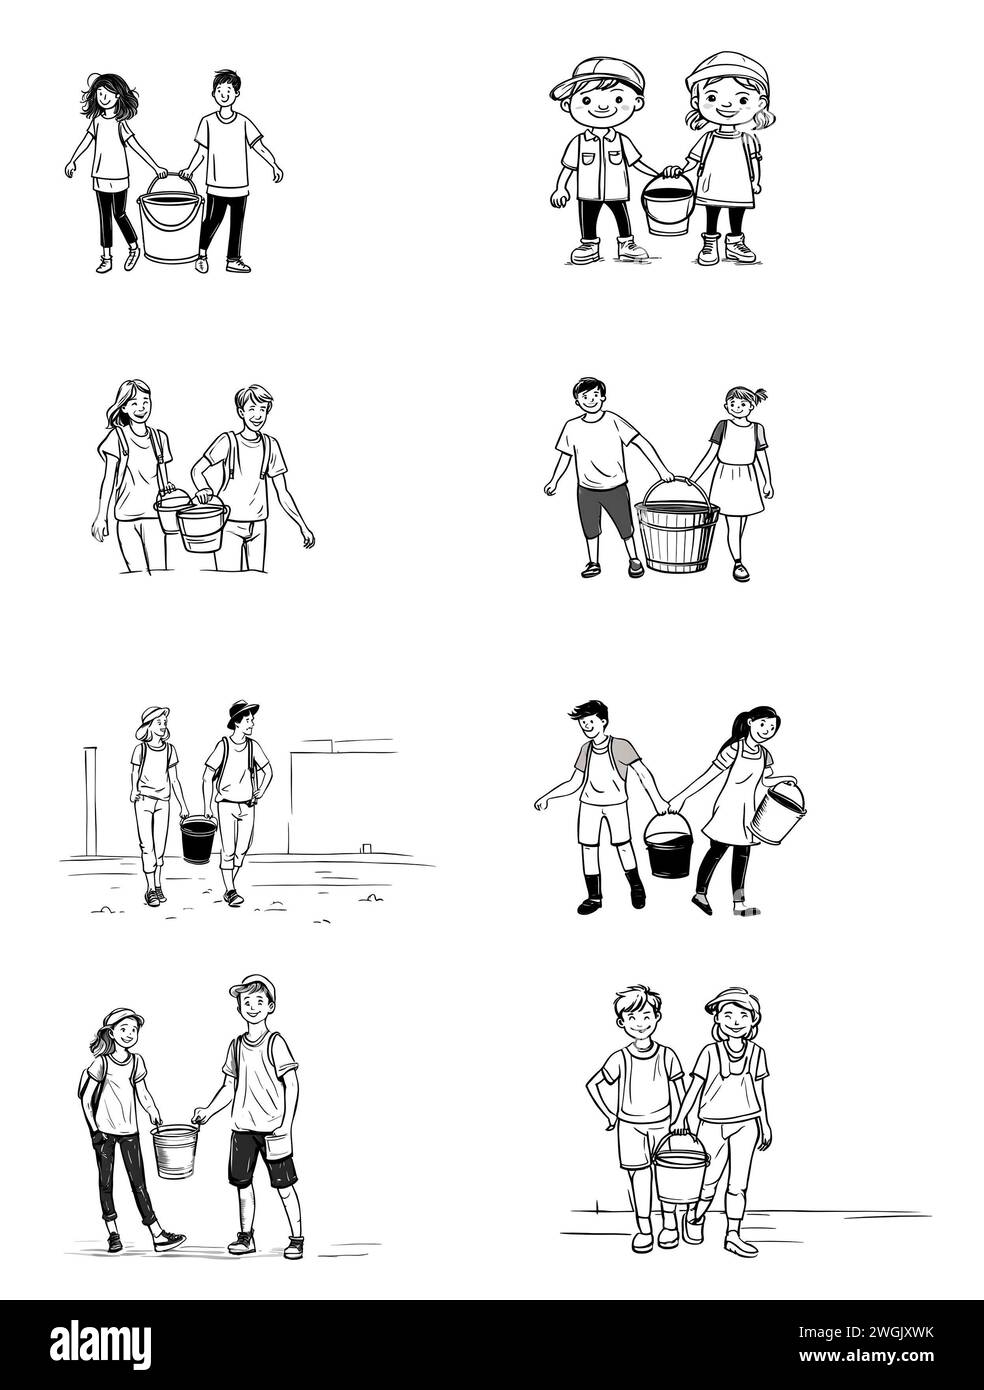 Minimalist icons, cartoon drawings Jack and Jill, black and white, isolated on white. Eight different Stock Photo